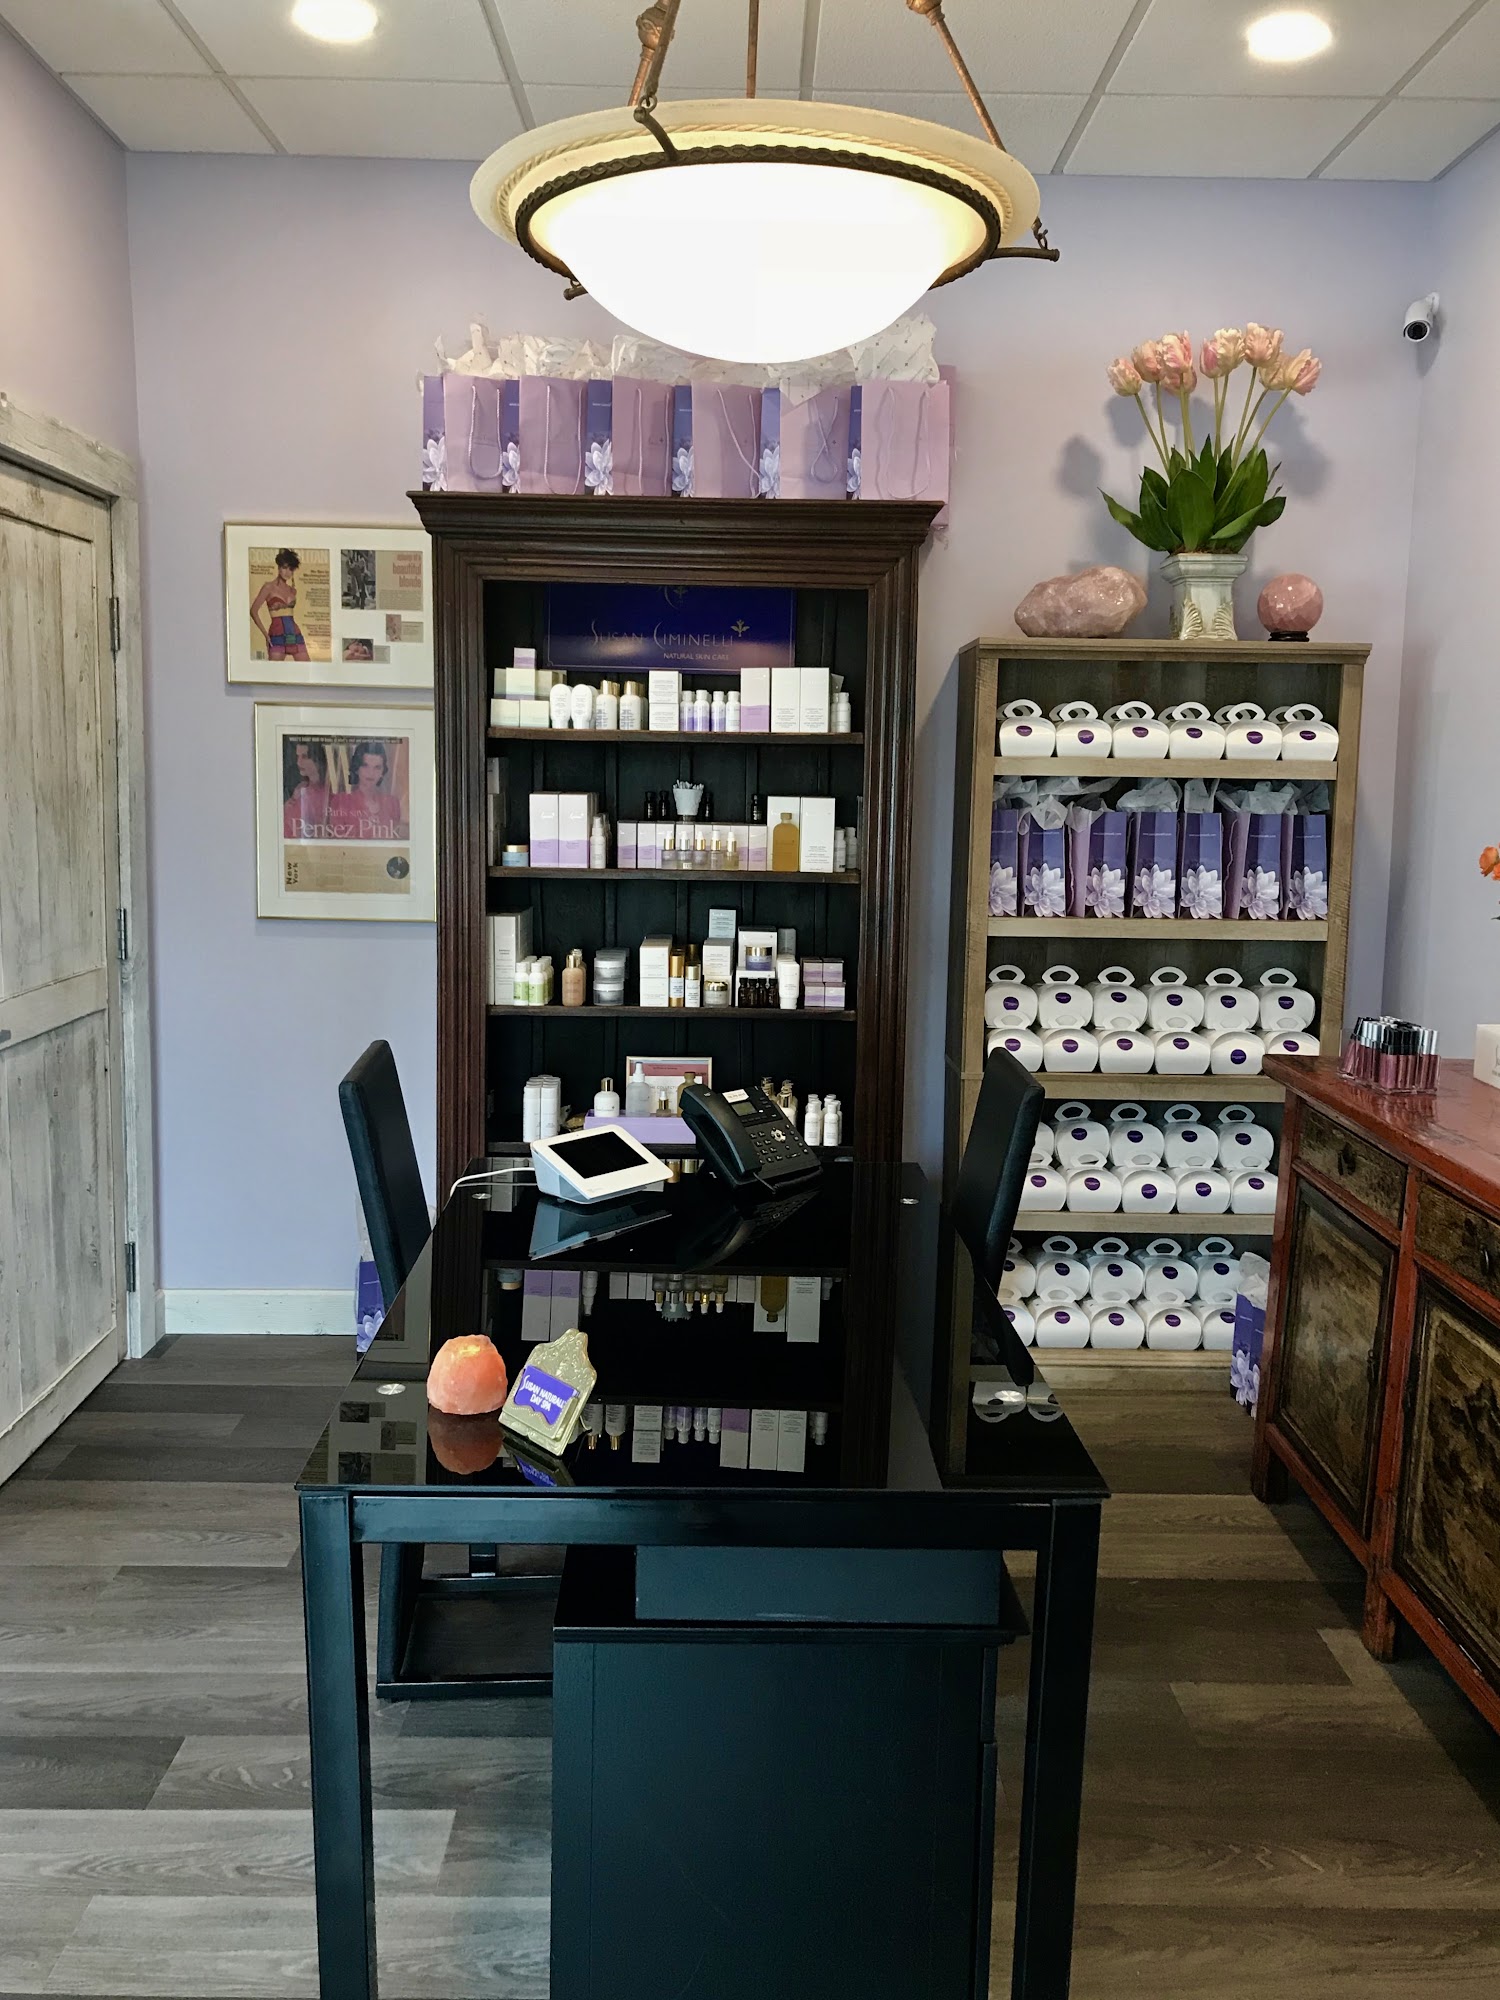 Susan Naturally Day Spa featuring Susan Ciminelli 3965 Main St, Snyder New York 14226